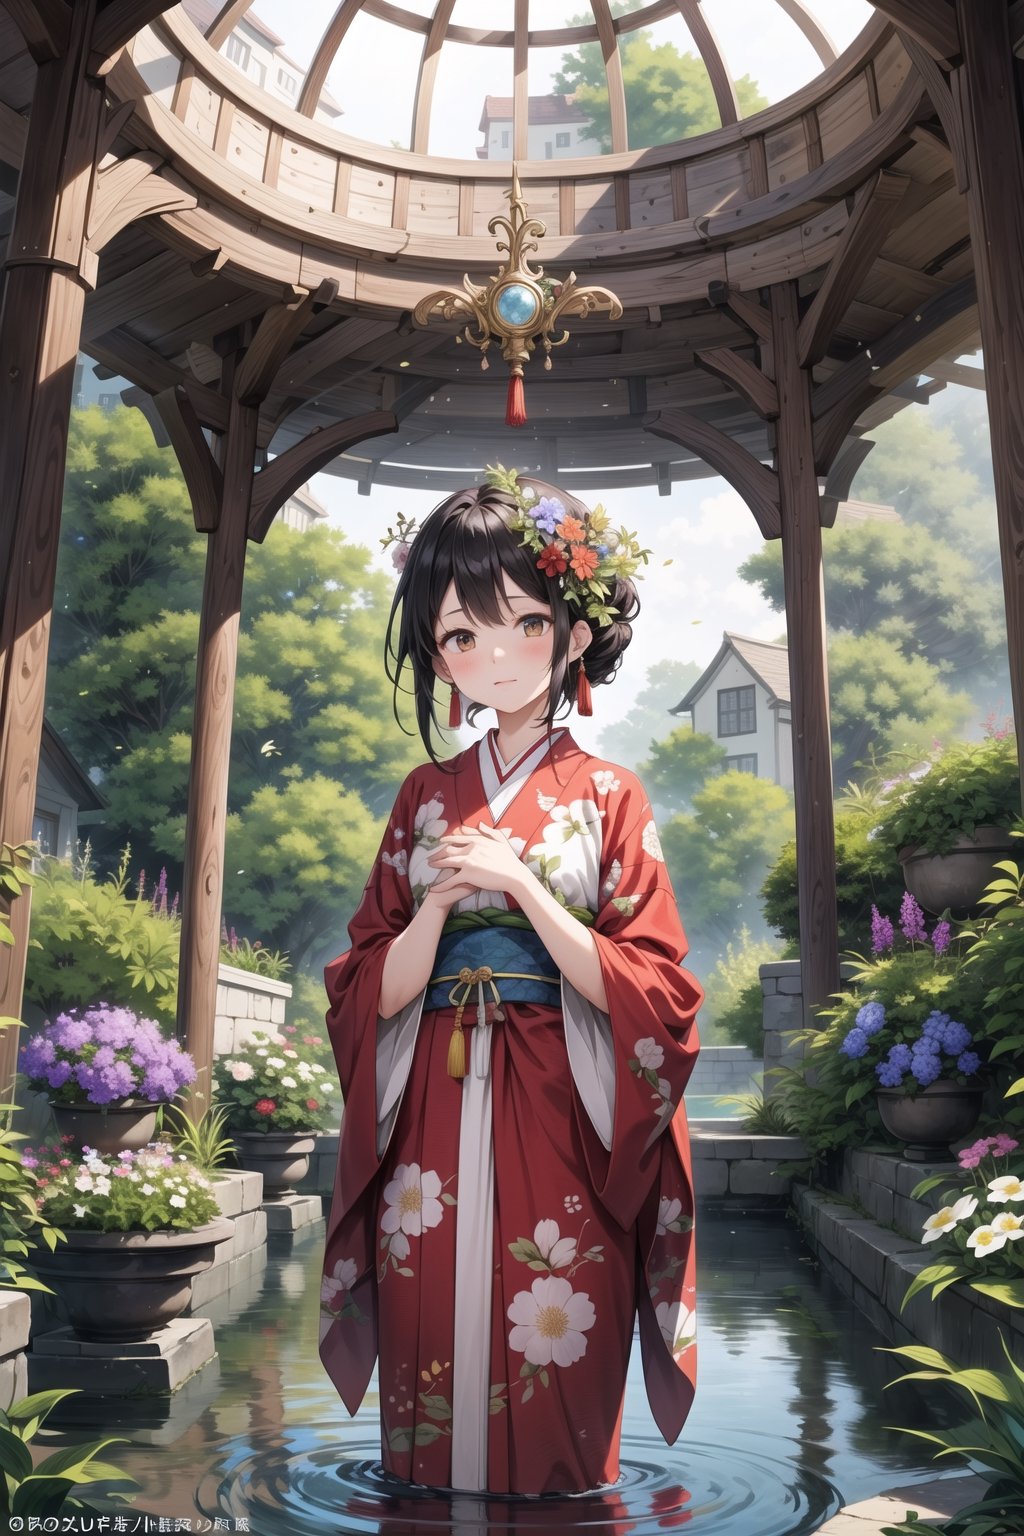 
In a garden where morning glories are blooming in wild abundance, a girl clad in a kimono stands serenely. Her traditional dress is a beautiful contrast against the vibrant blues, purples, and pinks of the flowers surrounding her. The morning light filters through the foliage, casting a soft glow on her delicate features. The kimono, with its intricate patterns and flowing sleeves, complements the natural beauty around her. She appears as if she is a part of this enchanting scene, where the tranquility of nature and the elegance of tradition merge seamlessly. Her gaze is thoughtful, perhaps reflecting on the fleeting beauty of the blossoms, which, like the moments in time, are here today and gone tomorrow. This serene tableau captures a moment of quiet beauty and contemplation amidst the riotous color of a garden in full bloom.